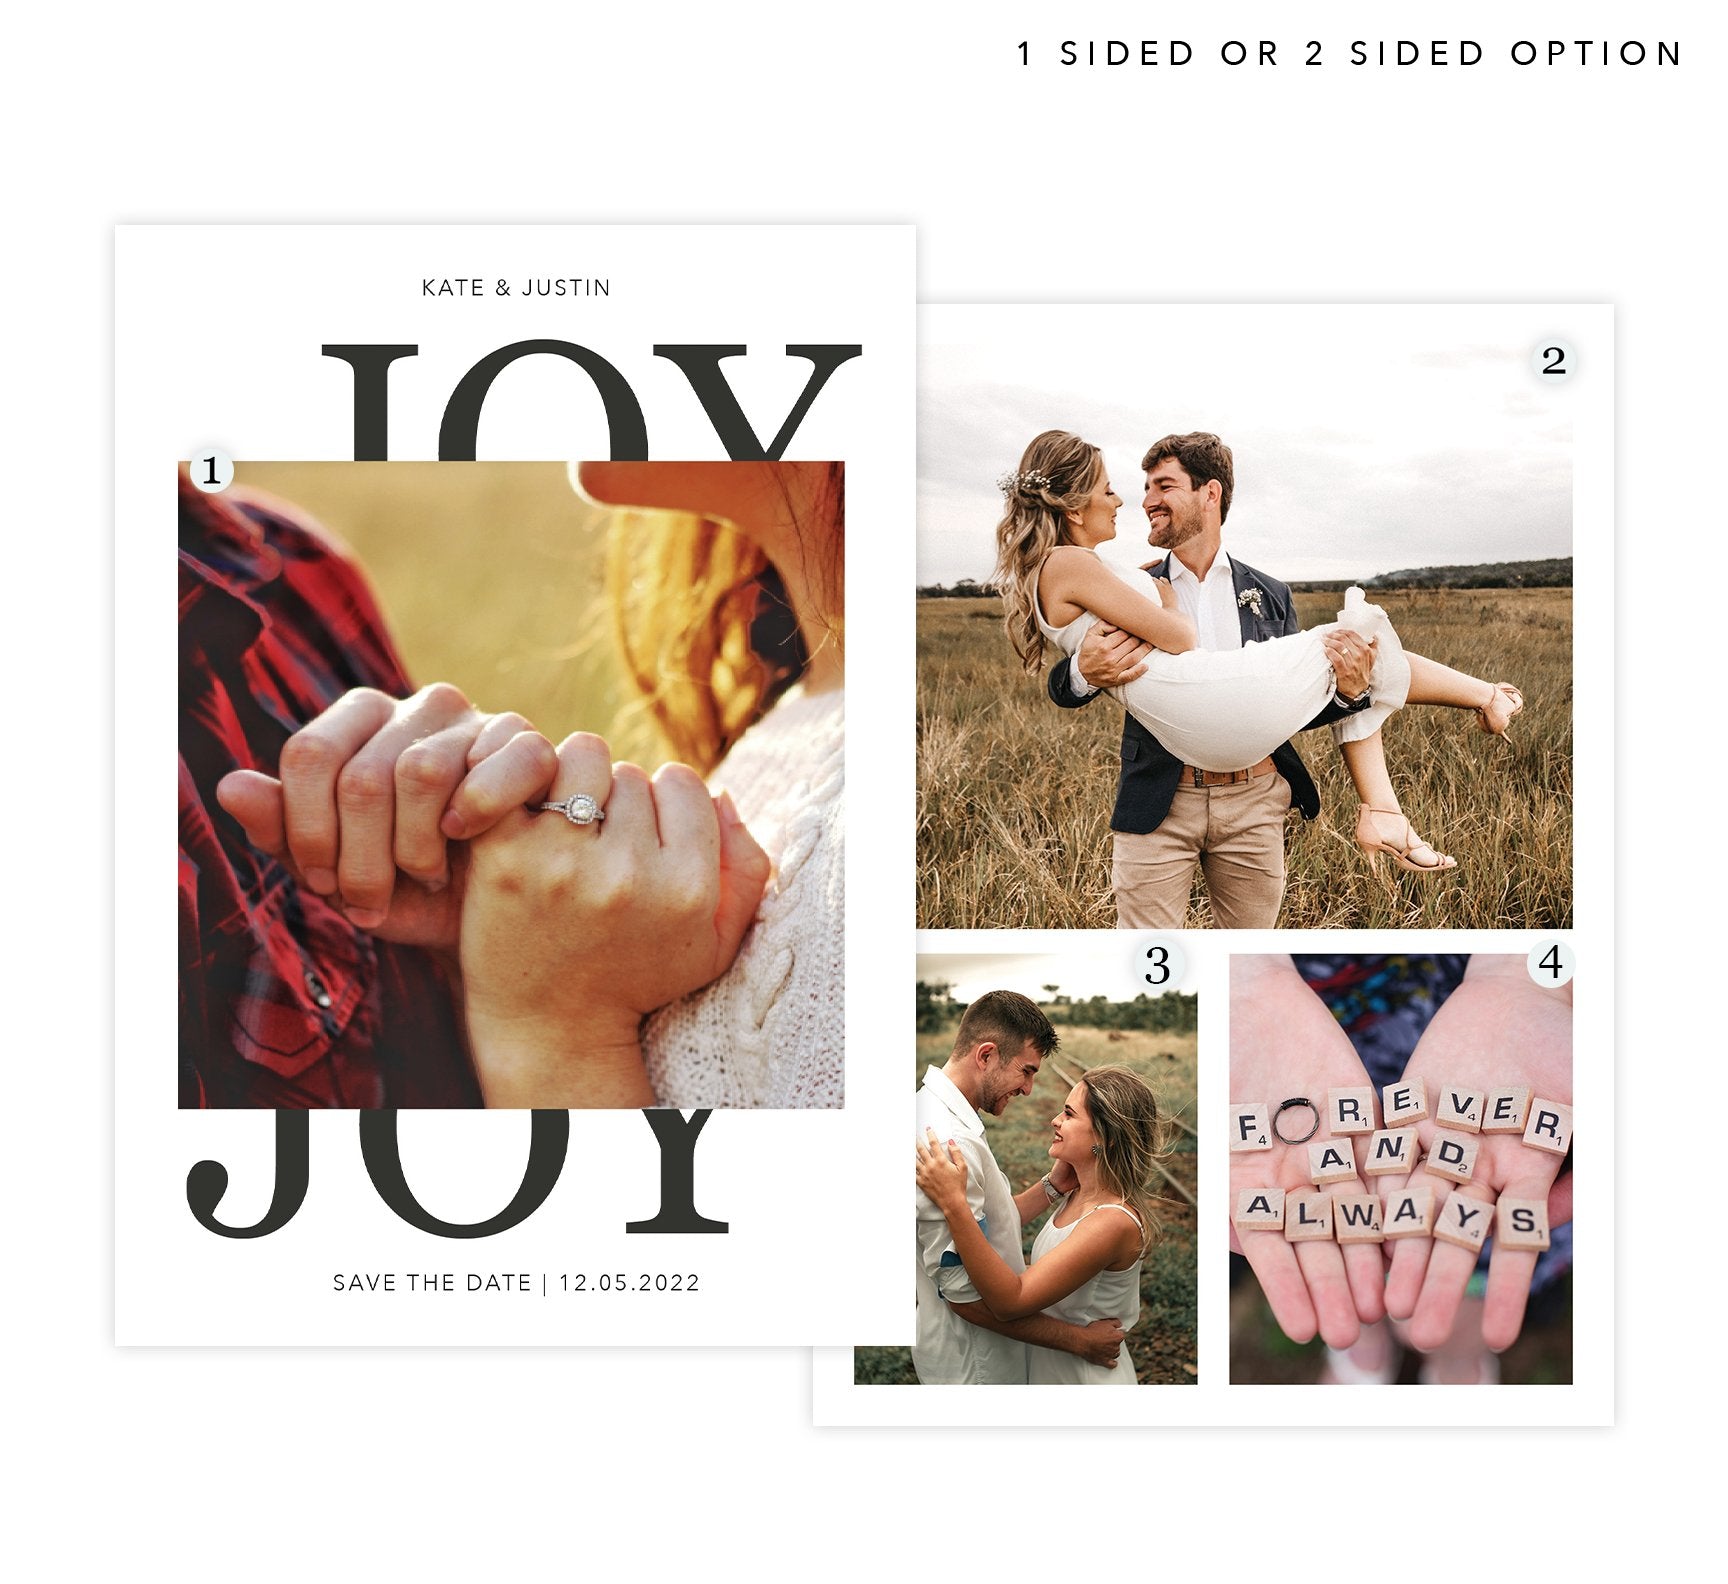 All Joy Save the Date Card 1 side or 2 sided options